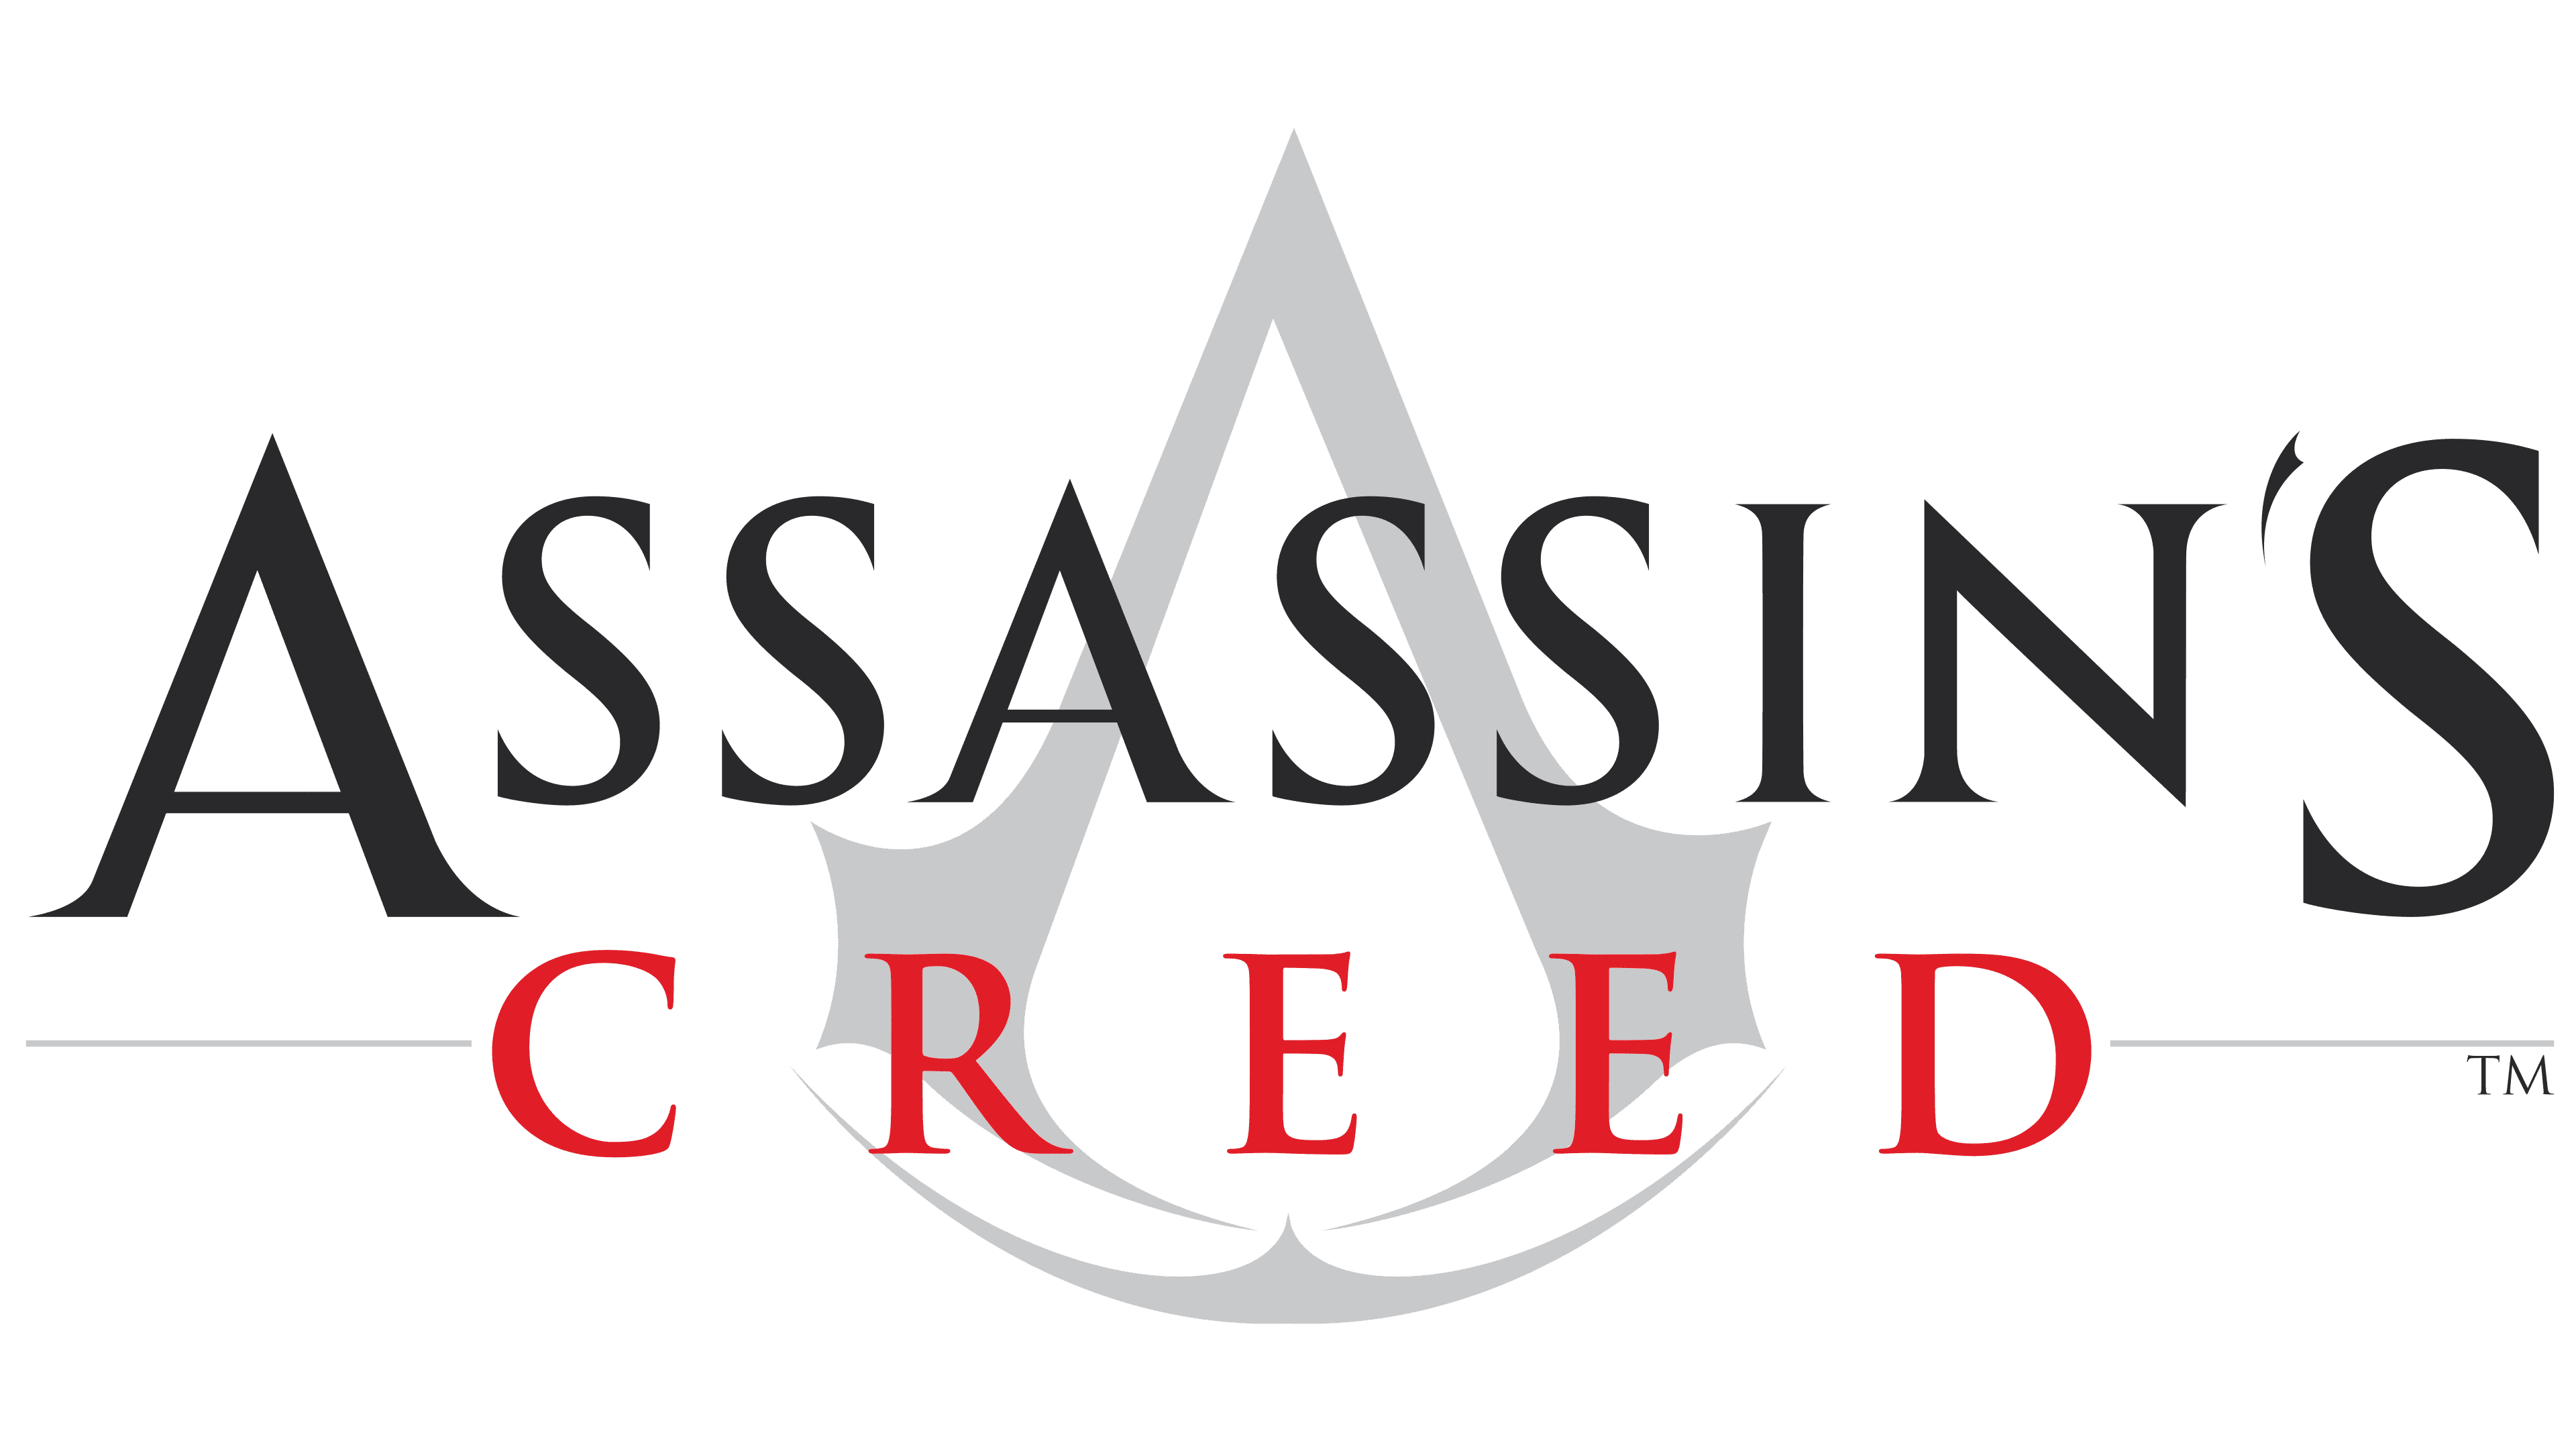 Assassin S Creed Logo Symbol Meaning History Png Brand